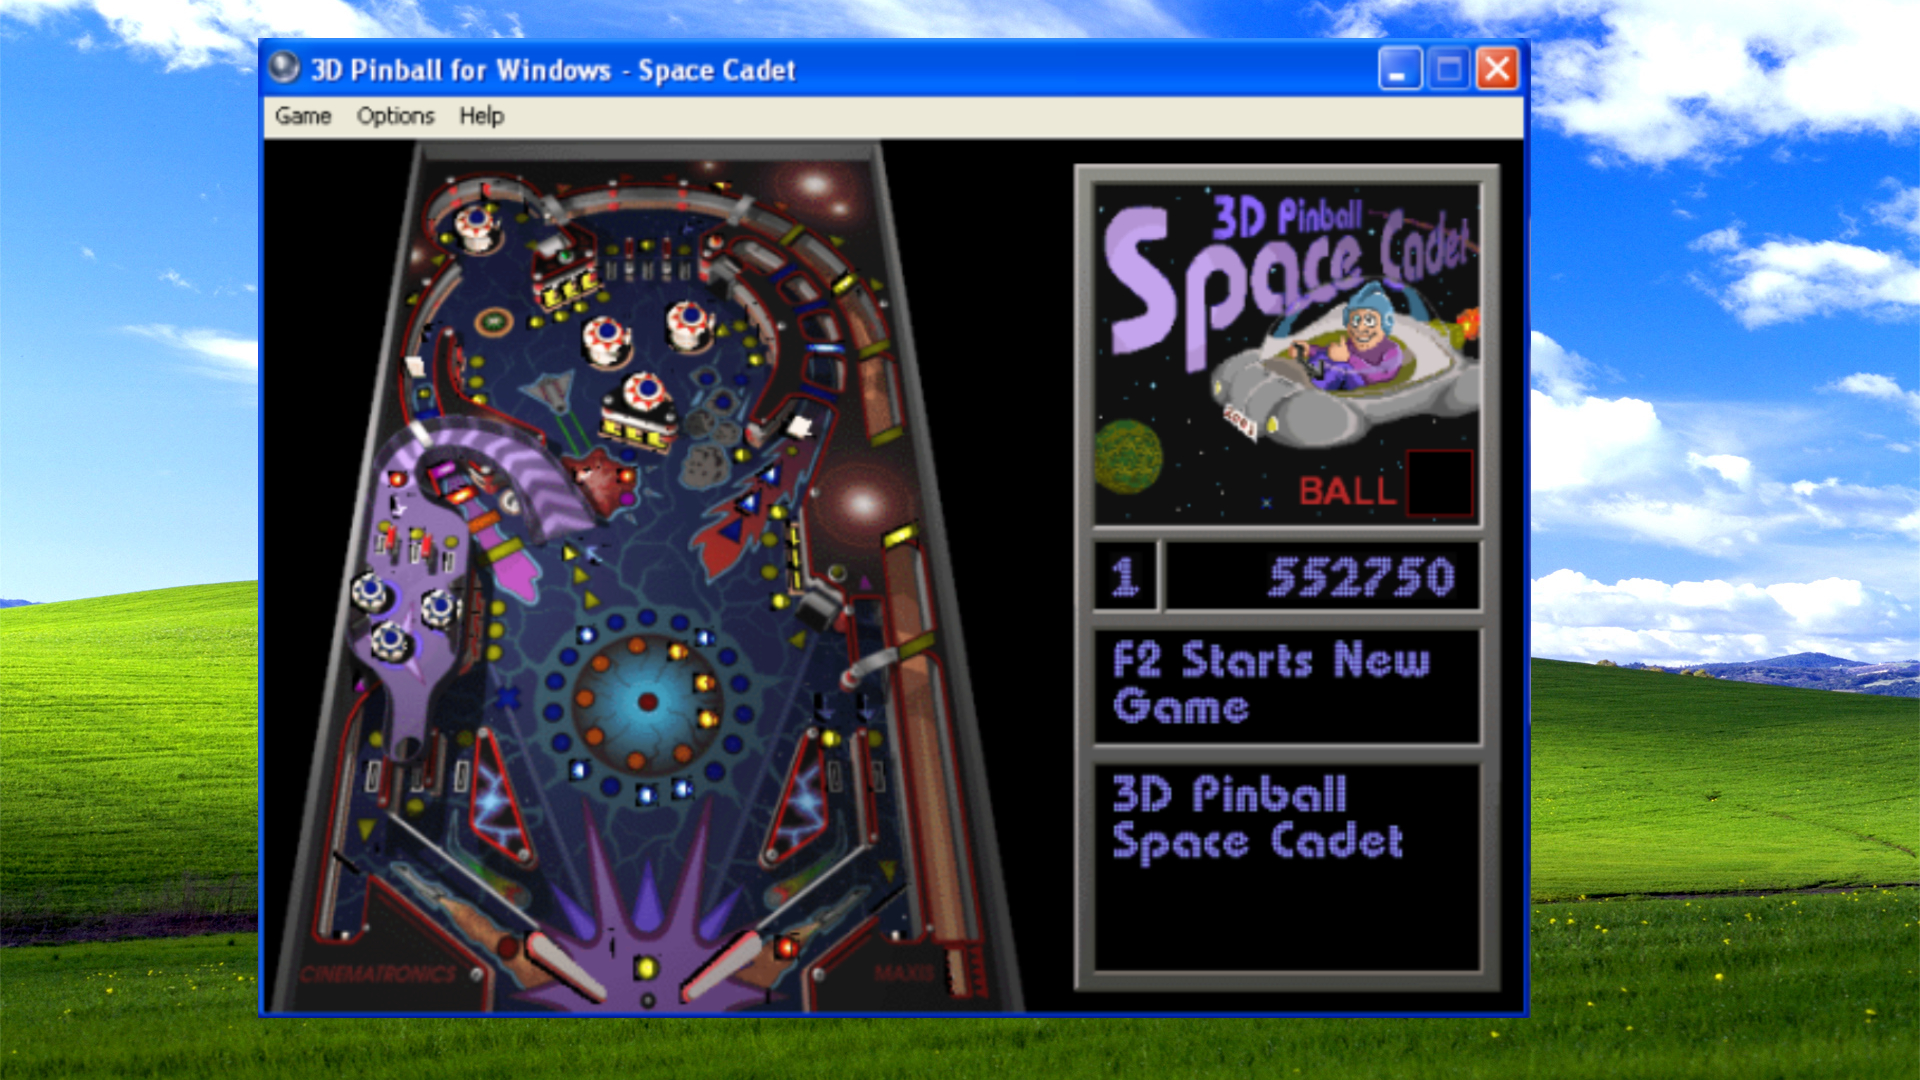 That's why the legendary Windows pinball game, Space Cadet, disappeared without a trace